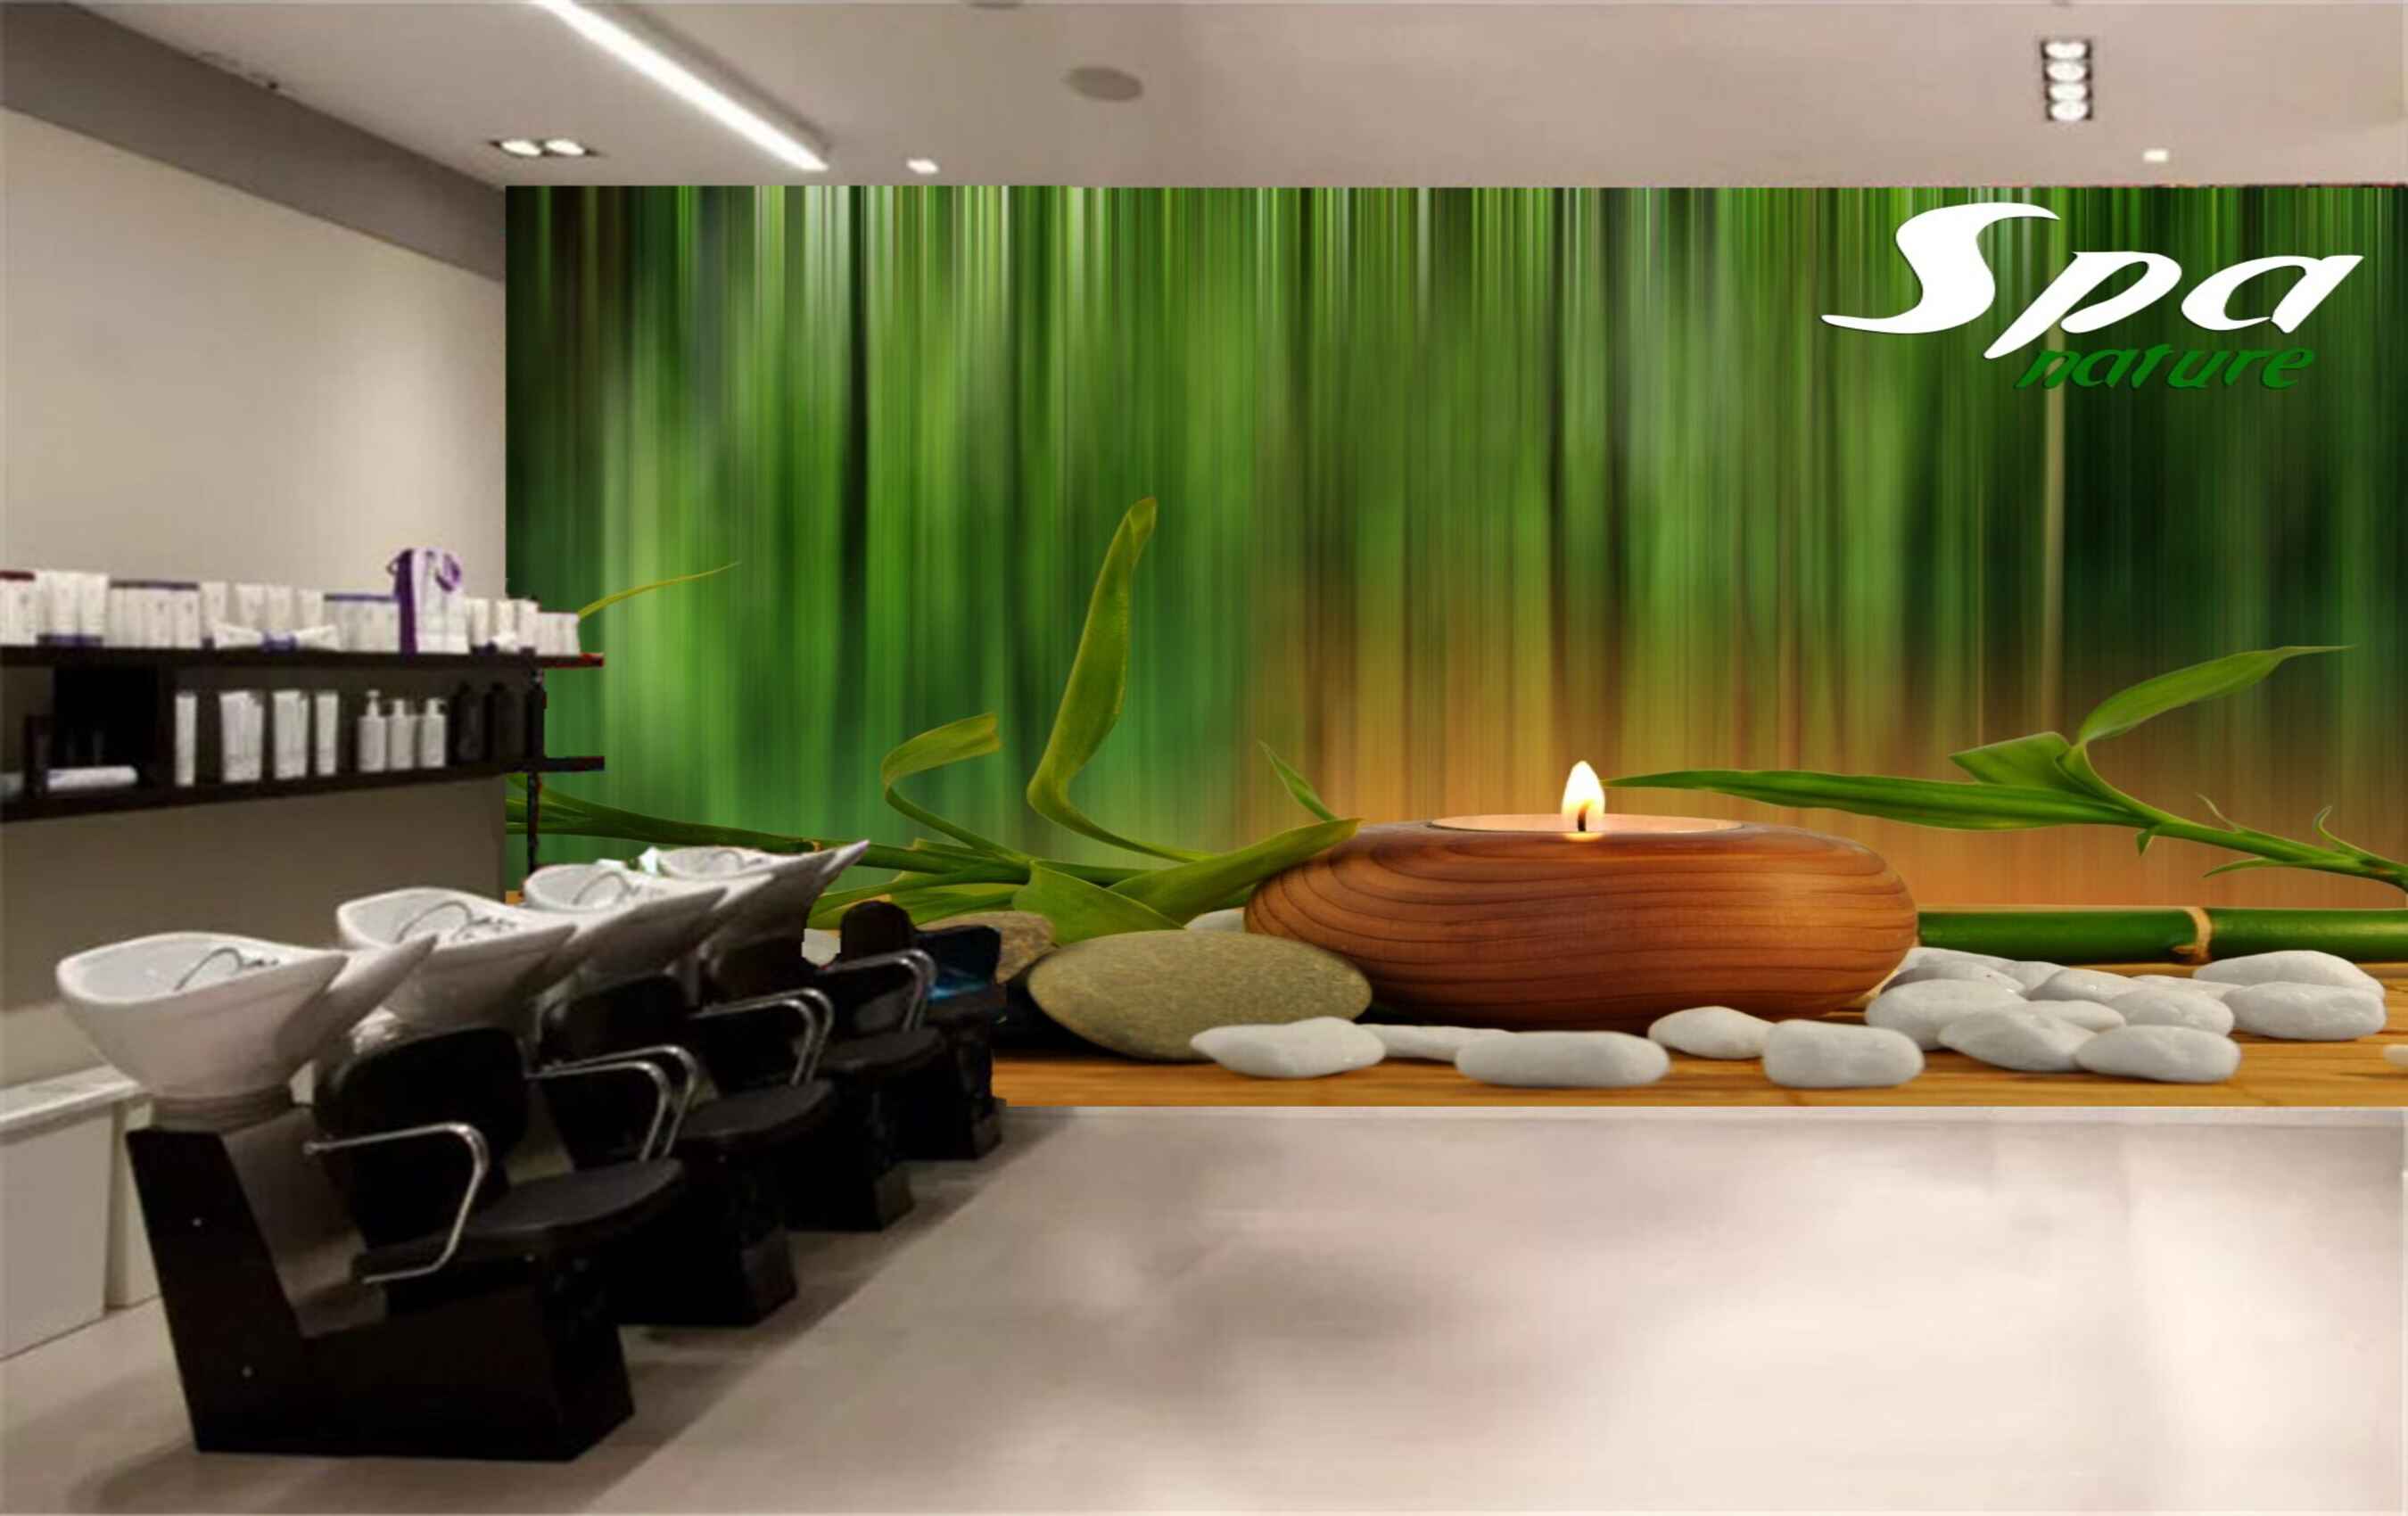 Avikalp MWZ3690 Spa Nature Candle Stones Green Leaves HD Wallpaper for Spa